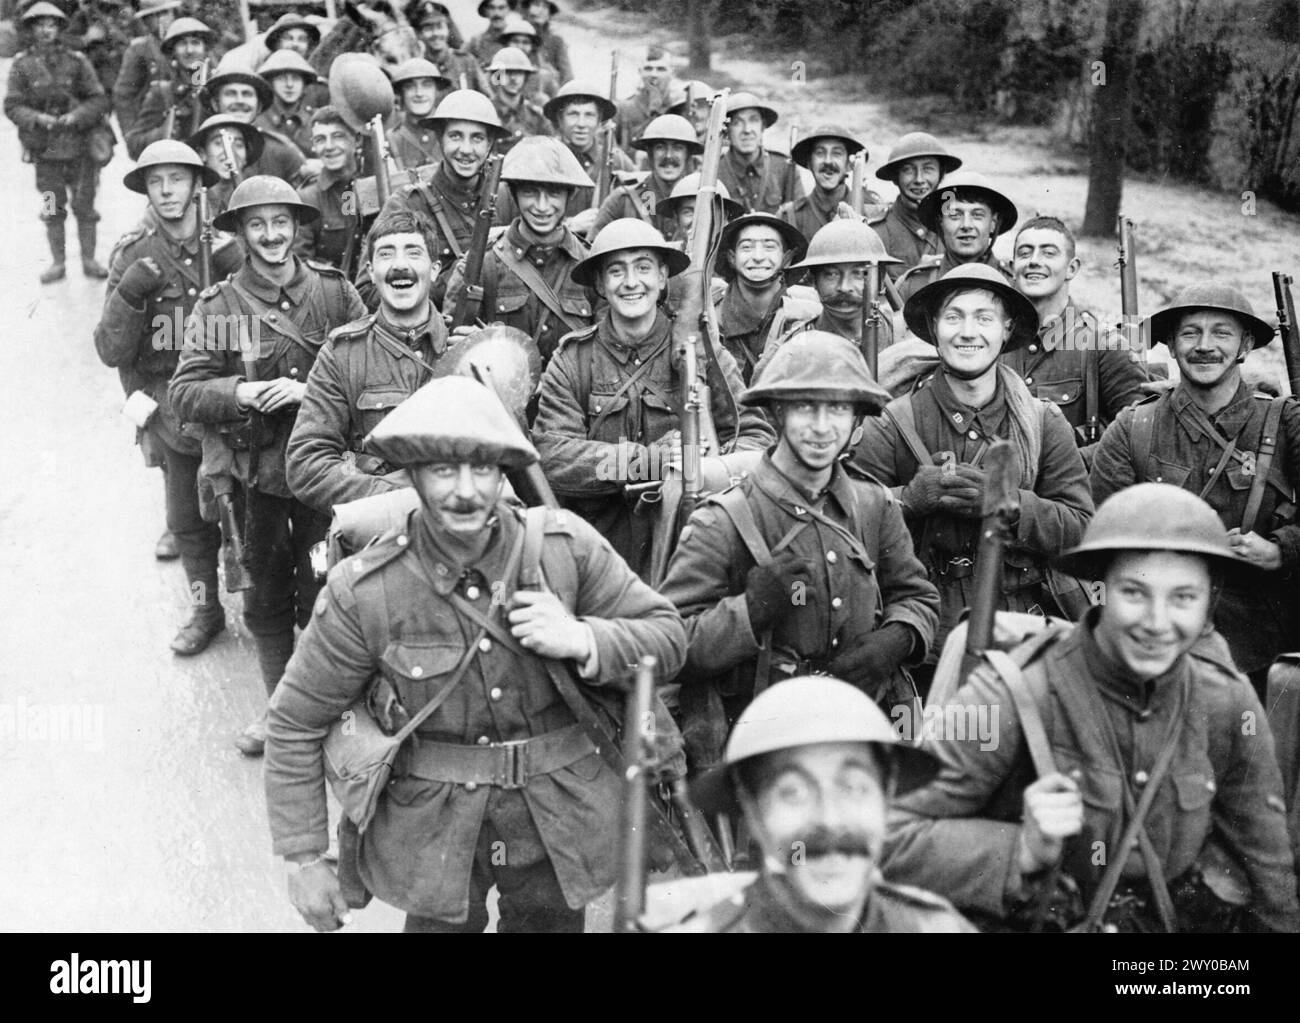 BATTLE OF THE SOMME 1916 Soldiers of the Royal Fusiliers (City of London Regiment) on their way to the front in November 1916 Stock Photo